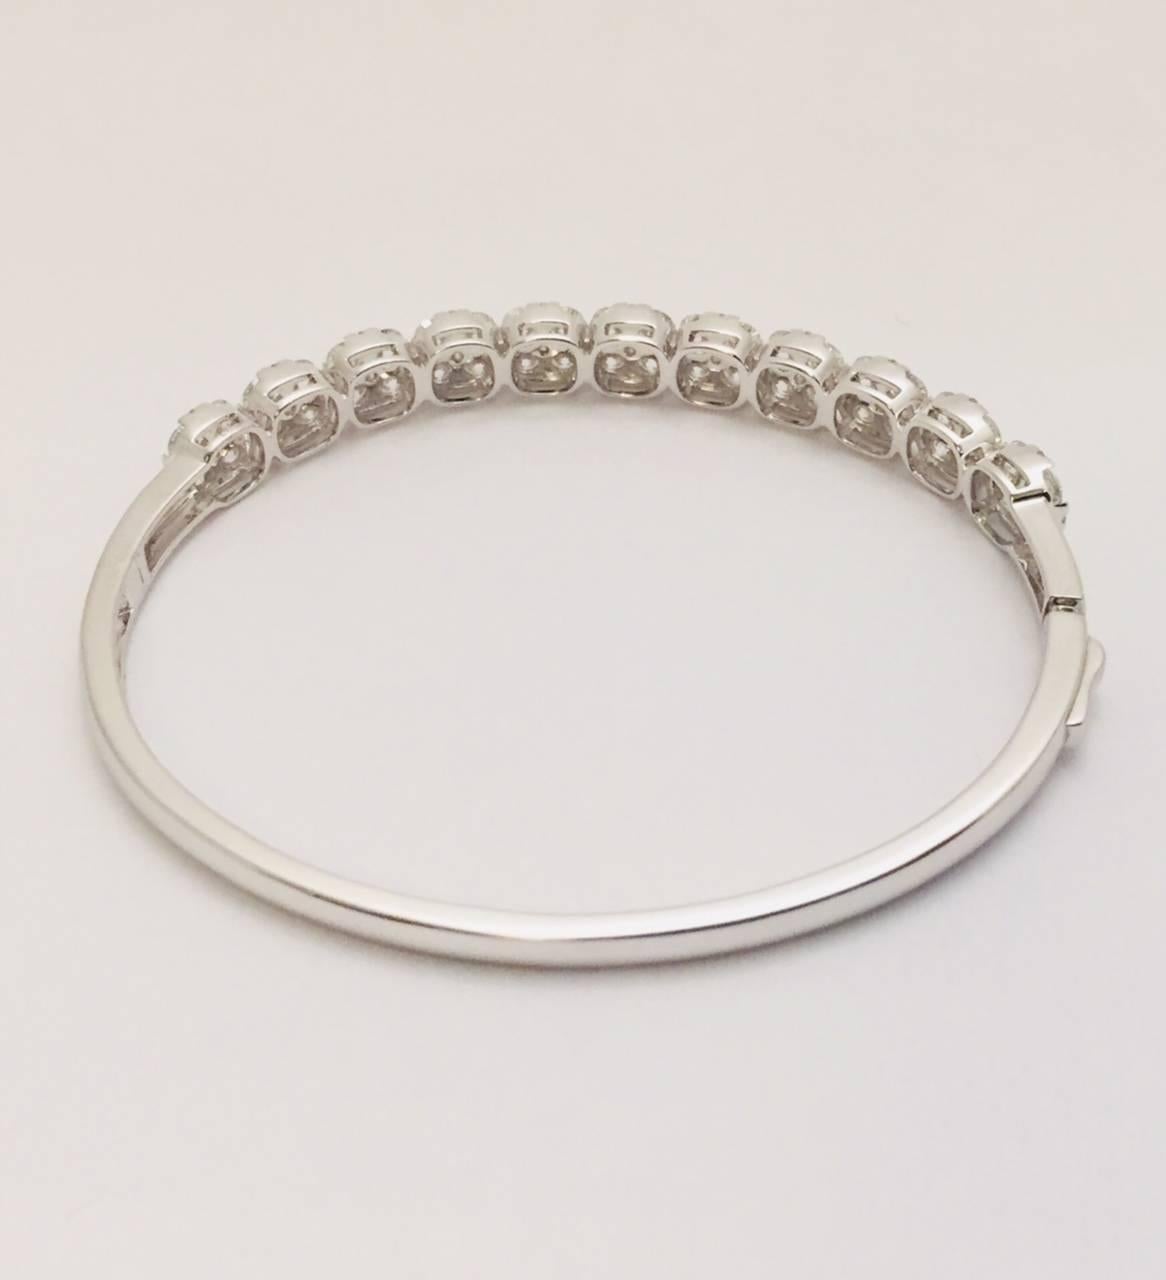 Quintessential 18K White Gold and Diamond Bangle Bracelet is elegance defined.  Features 44 round cut diamonds weighing 4.49cts and an additional 55 round cut diamonds weighing .50cts - almost a total of 5 carats!  Clamp closure.  Promises to become